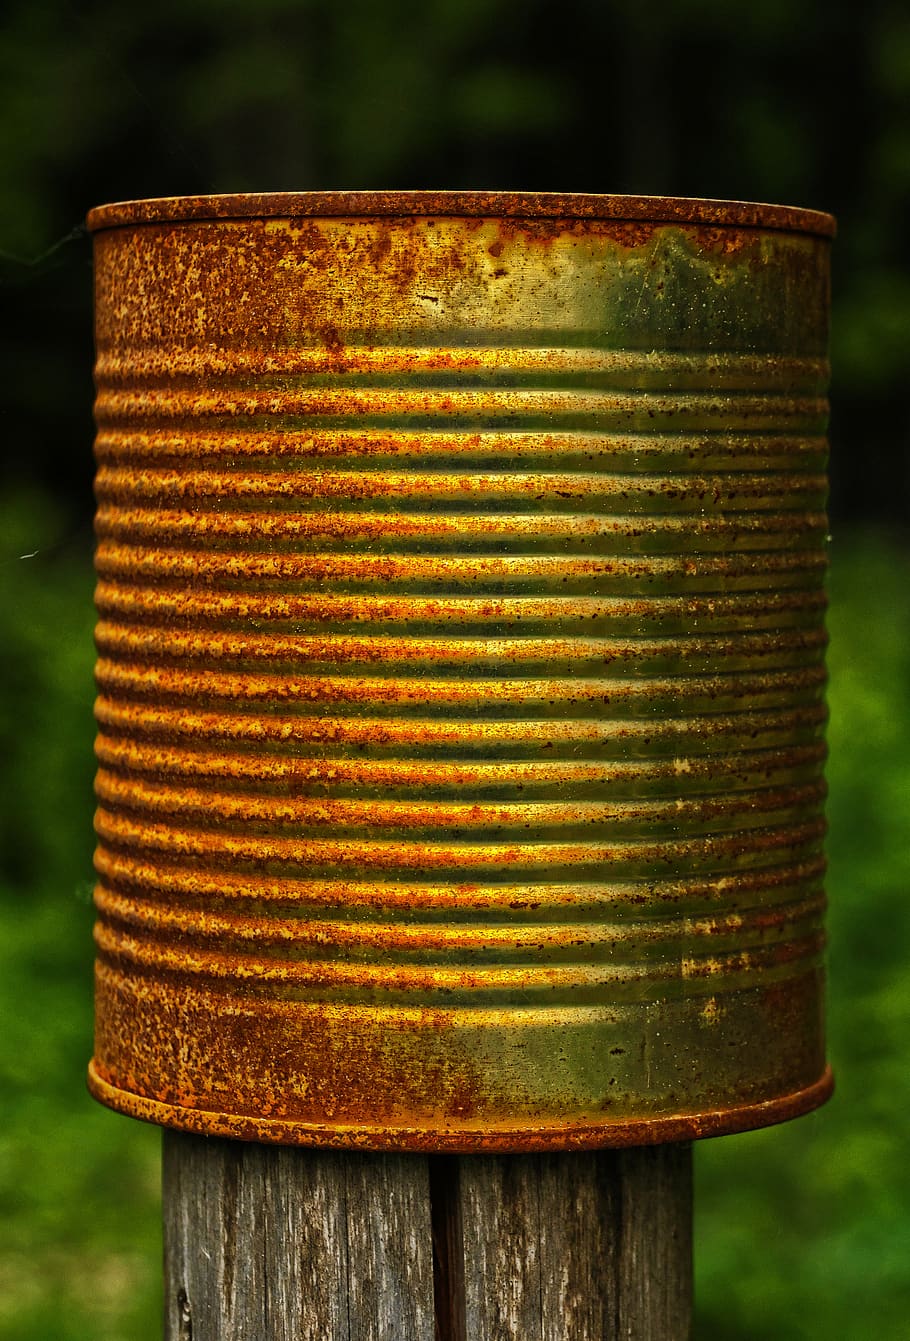 post, box, rusty, tin can, wooden posts, post completion of, rusted, weathered, wood, metal